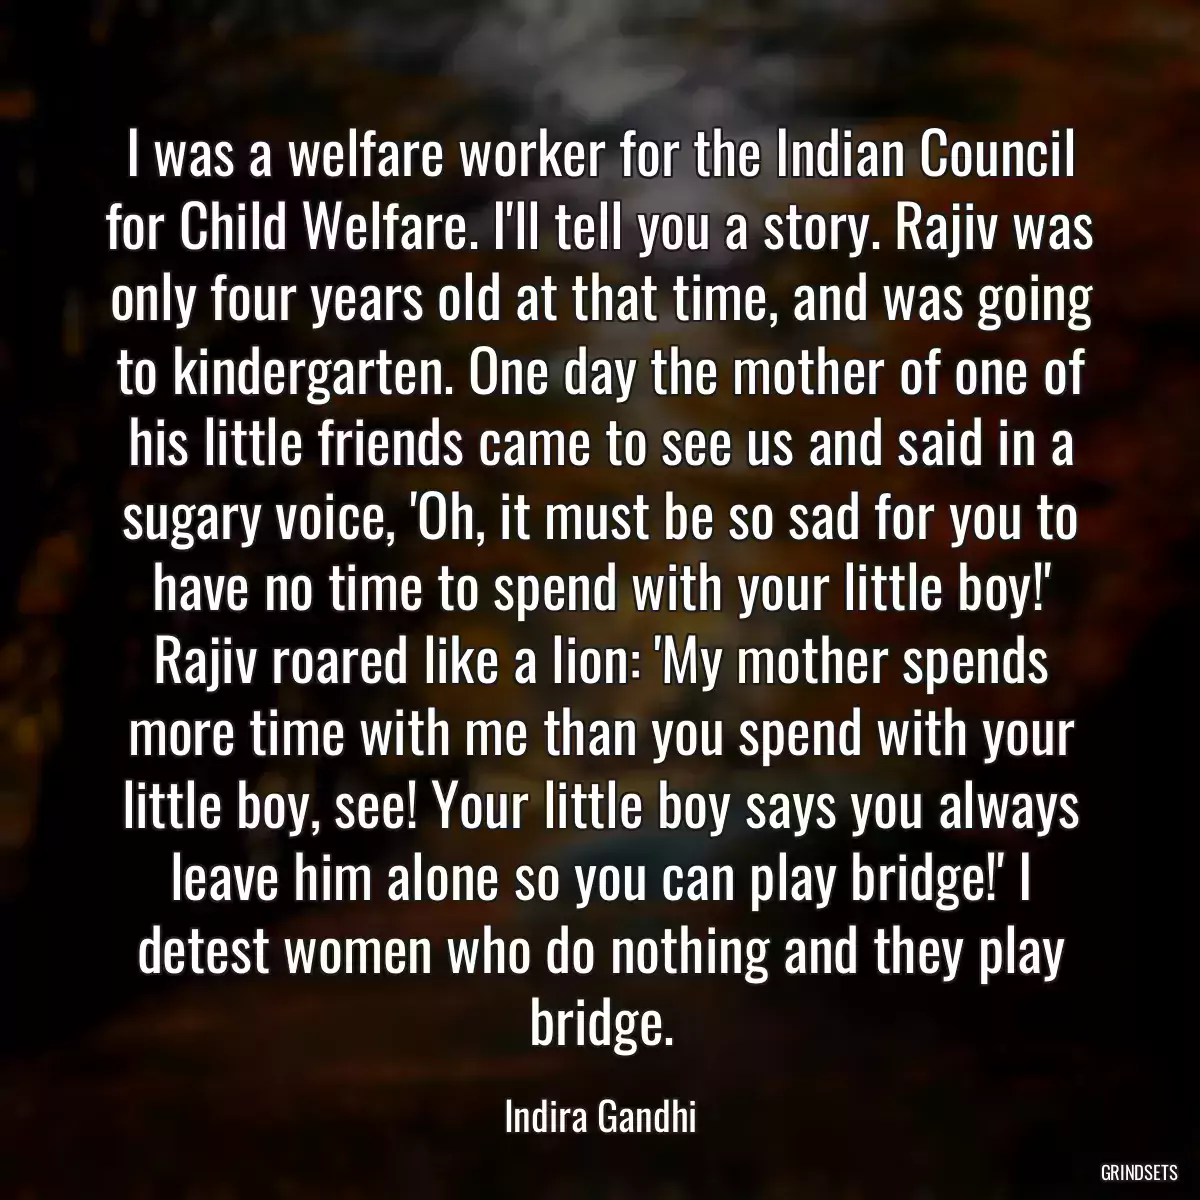 I was a welfare worker for the Indian Council for Child Welfare. I\'ll tell you a story. Rajiv was only four years old at that time, and was going to kindergarten. One day the mother of one of his little friends came to see us and said in a sugary voice, \'Oh, it must be so sad for you to have no time to spend with your little boy!\' Rajiv roared like a lion: \'My mother spends more time with me than you spend with your little boy, see! Your little boy says you always leave him alone so you can play bridge!\' I detest women who do nothing and they play bridge.